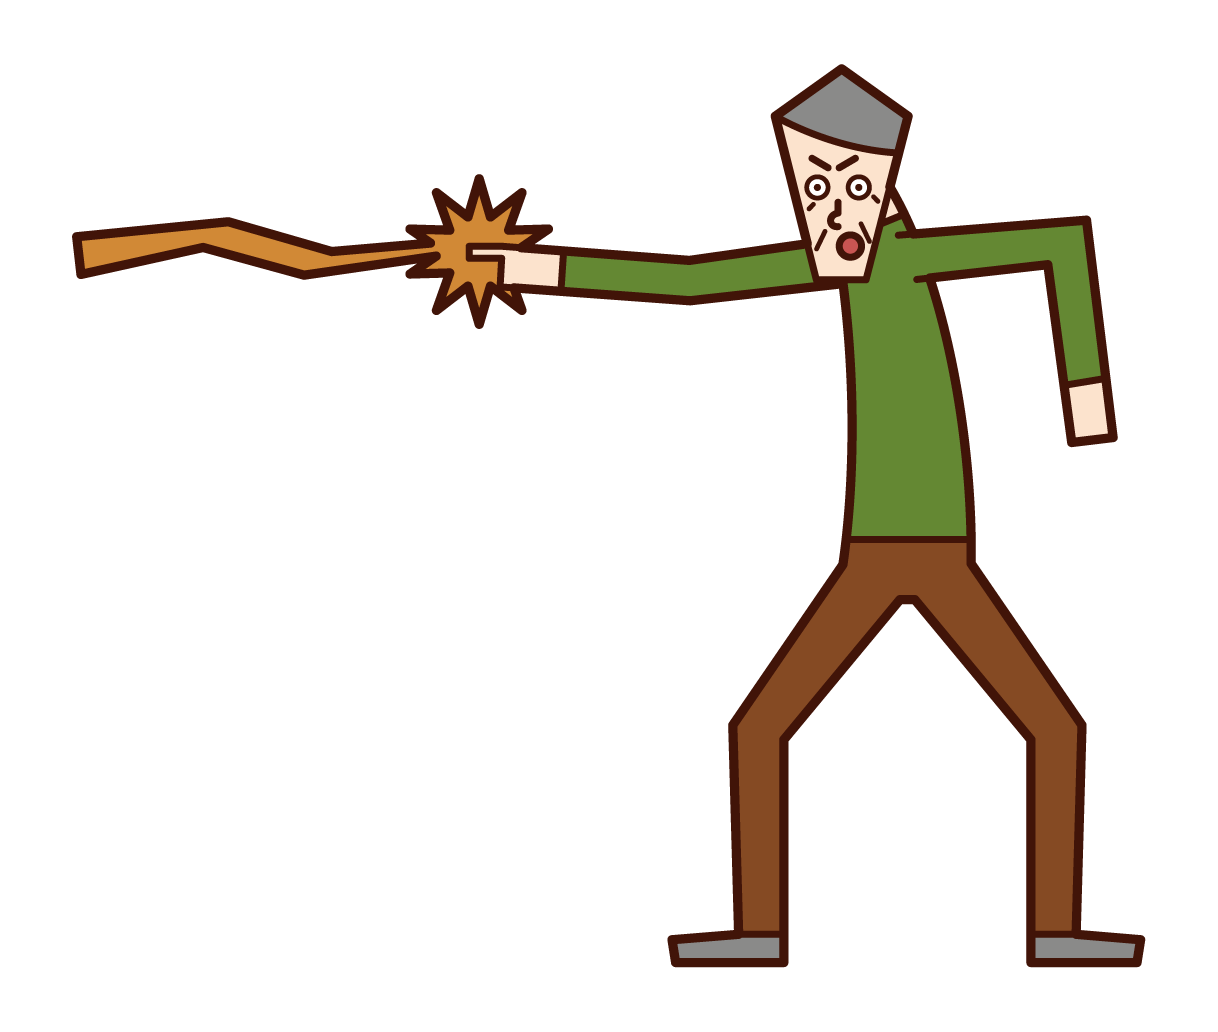 Illustration of a person (grandmother) firing a beam from a finger